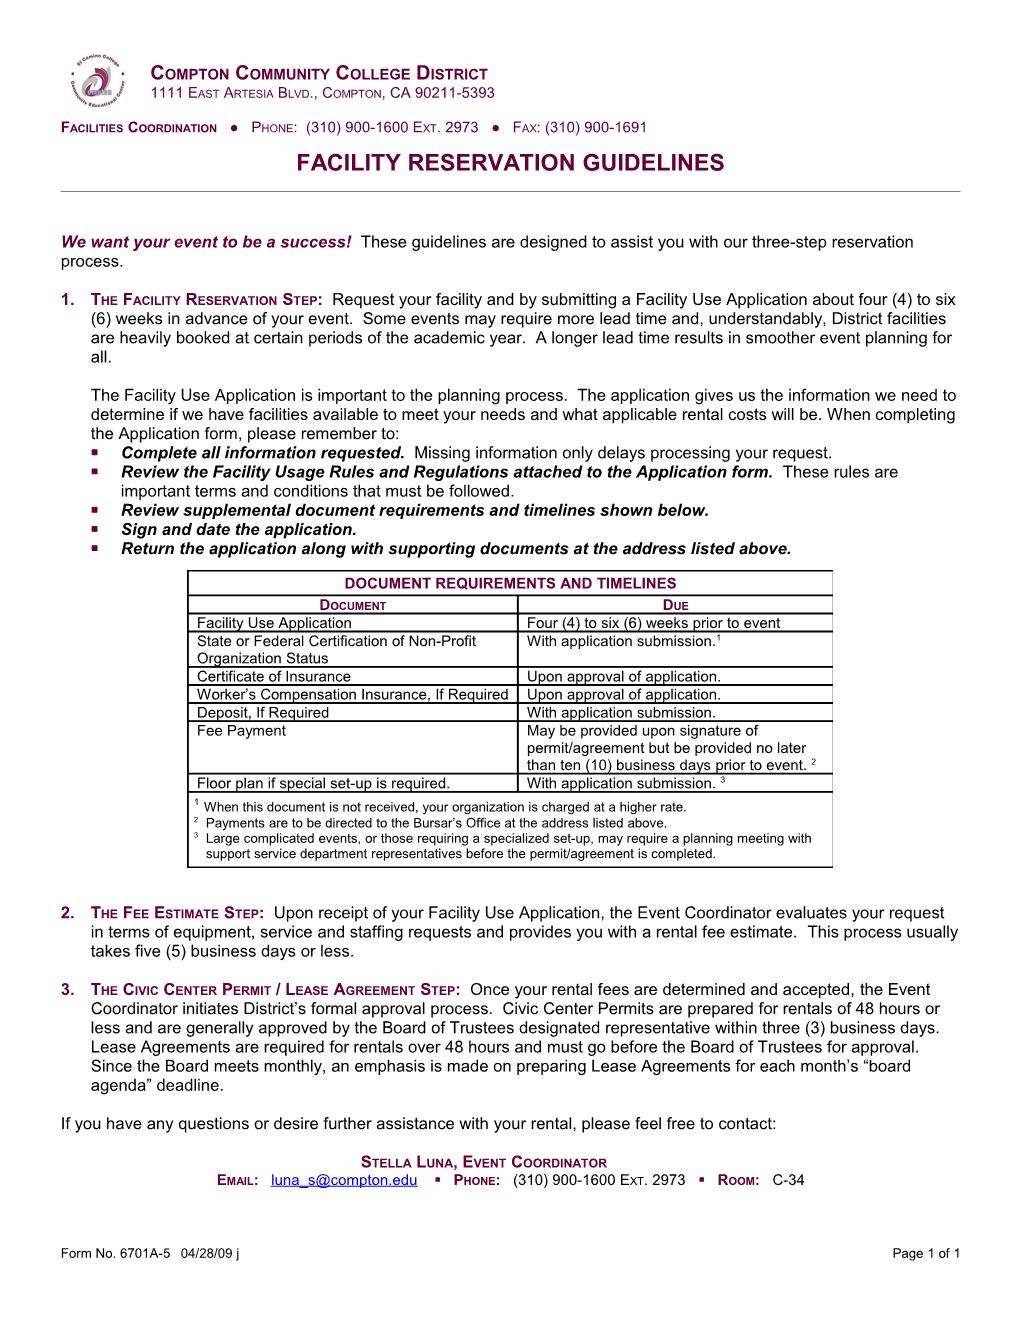 Facility Reservation Guidelines